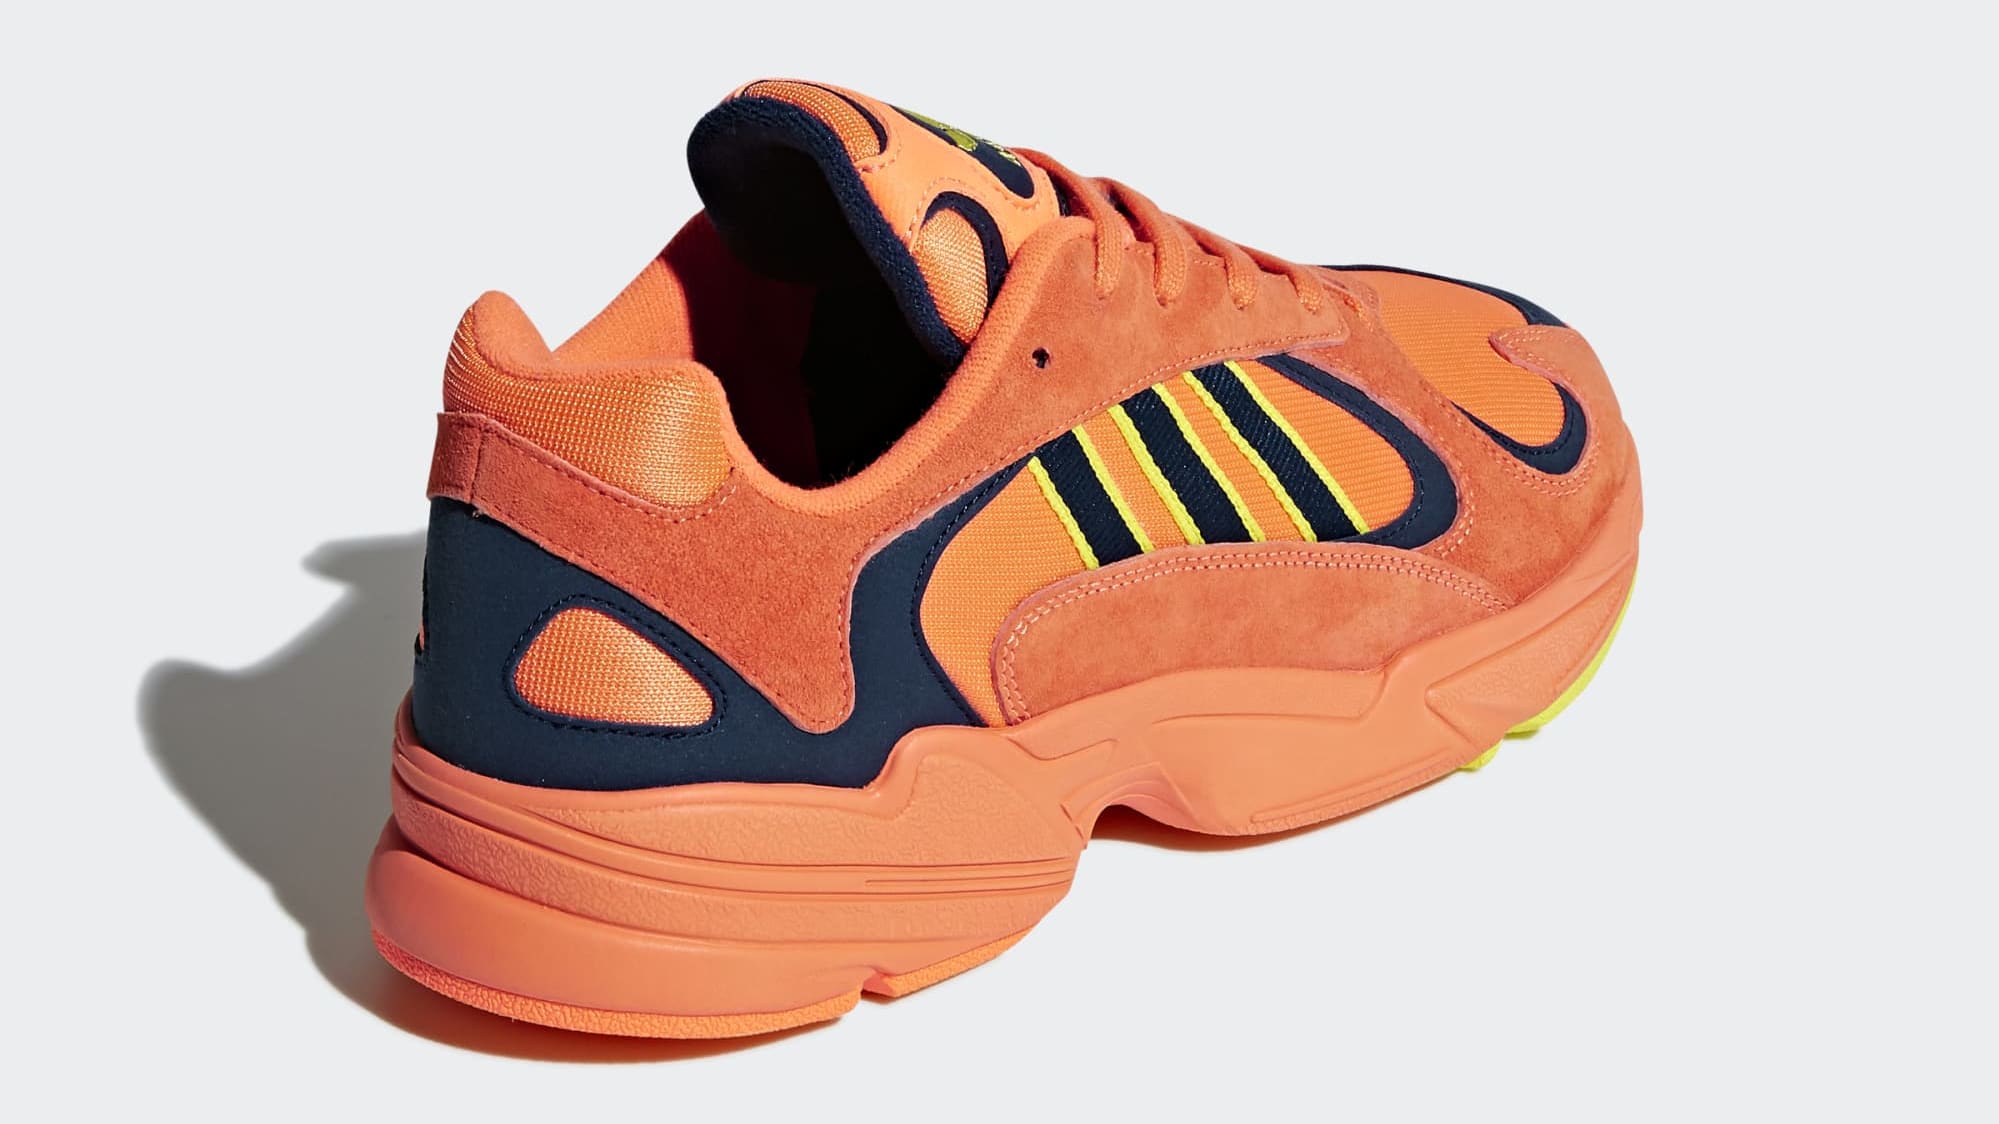 Another of the Adidas Yung-1 Releasing This Week